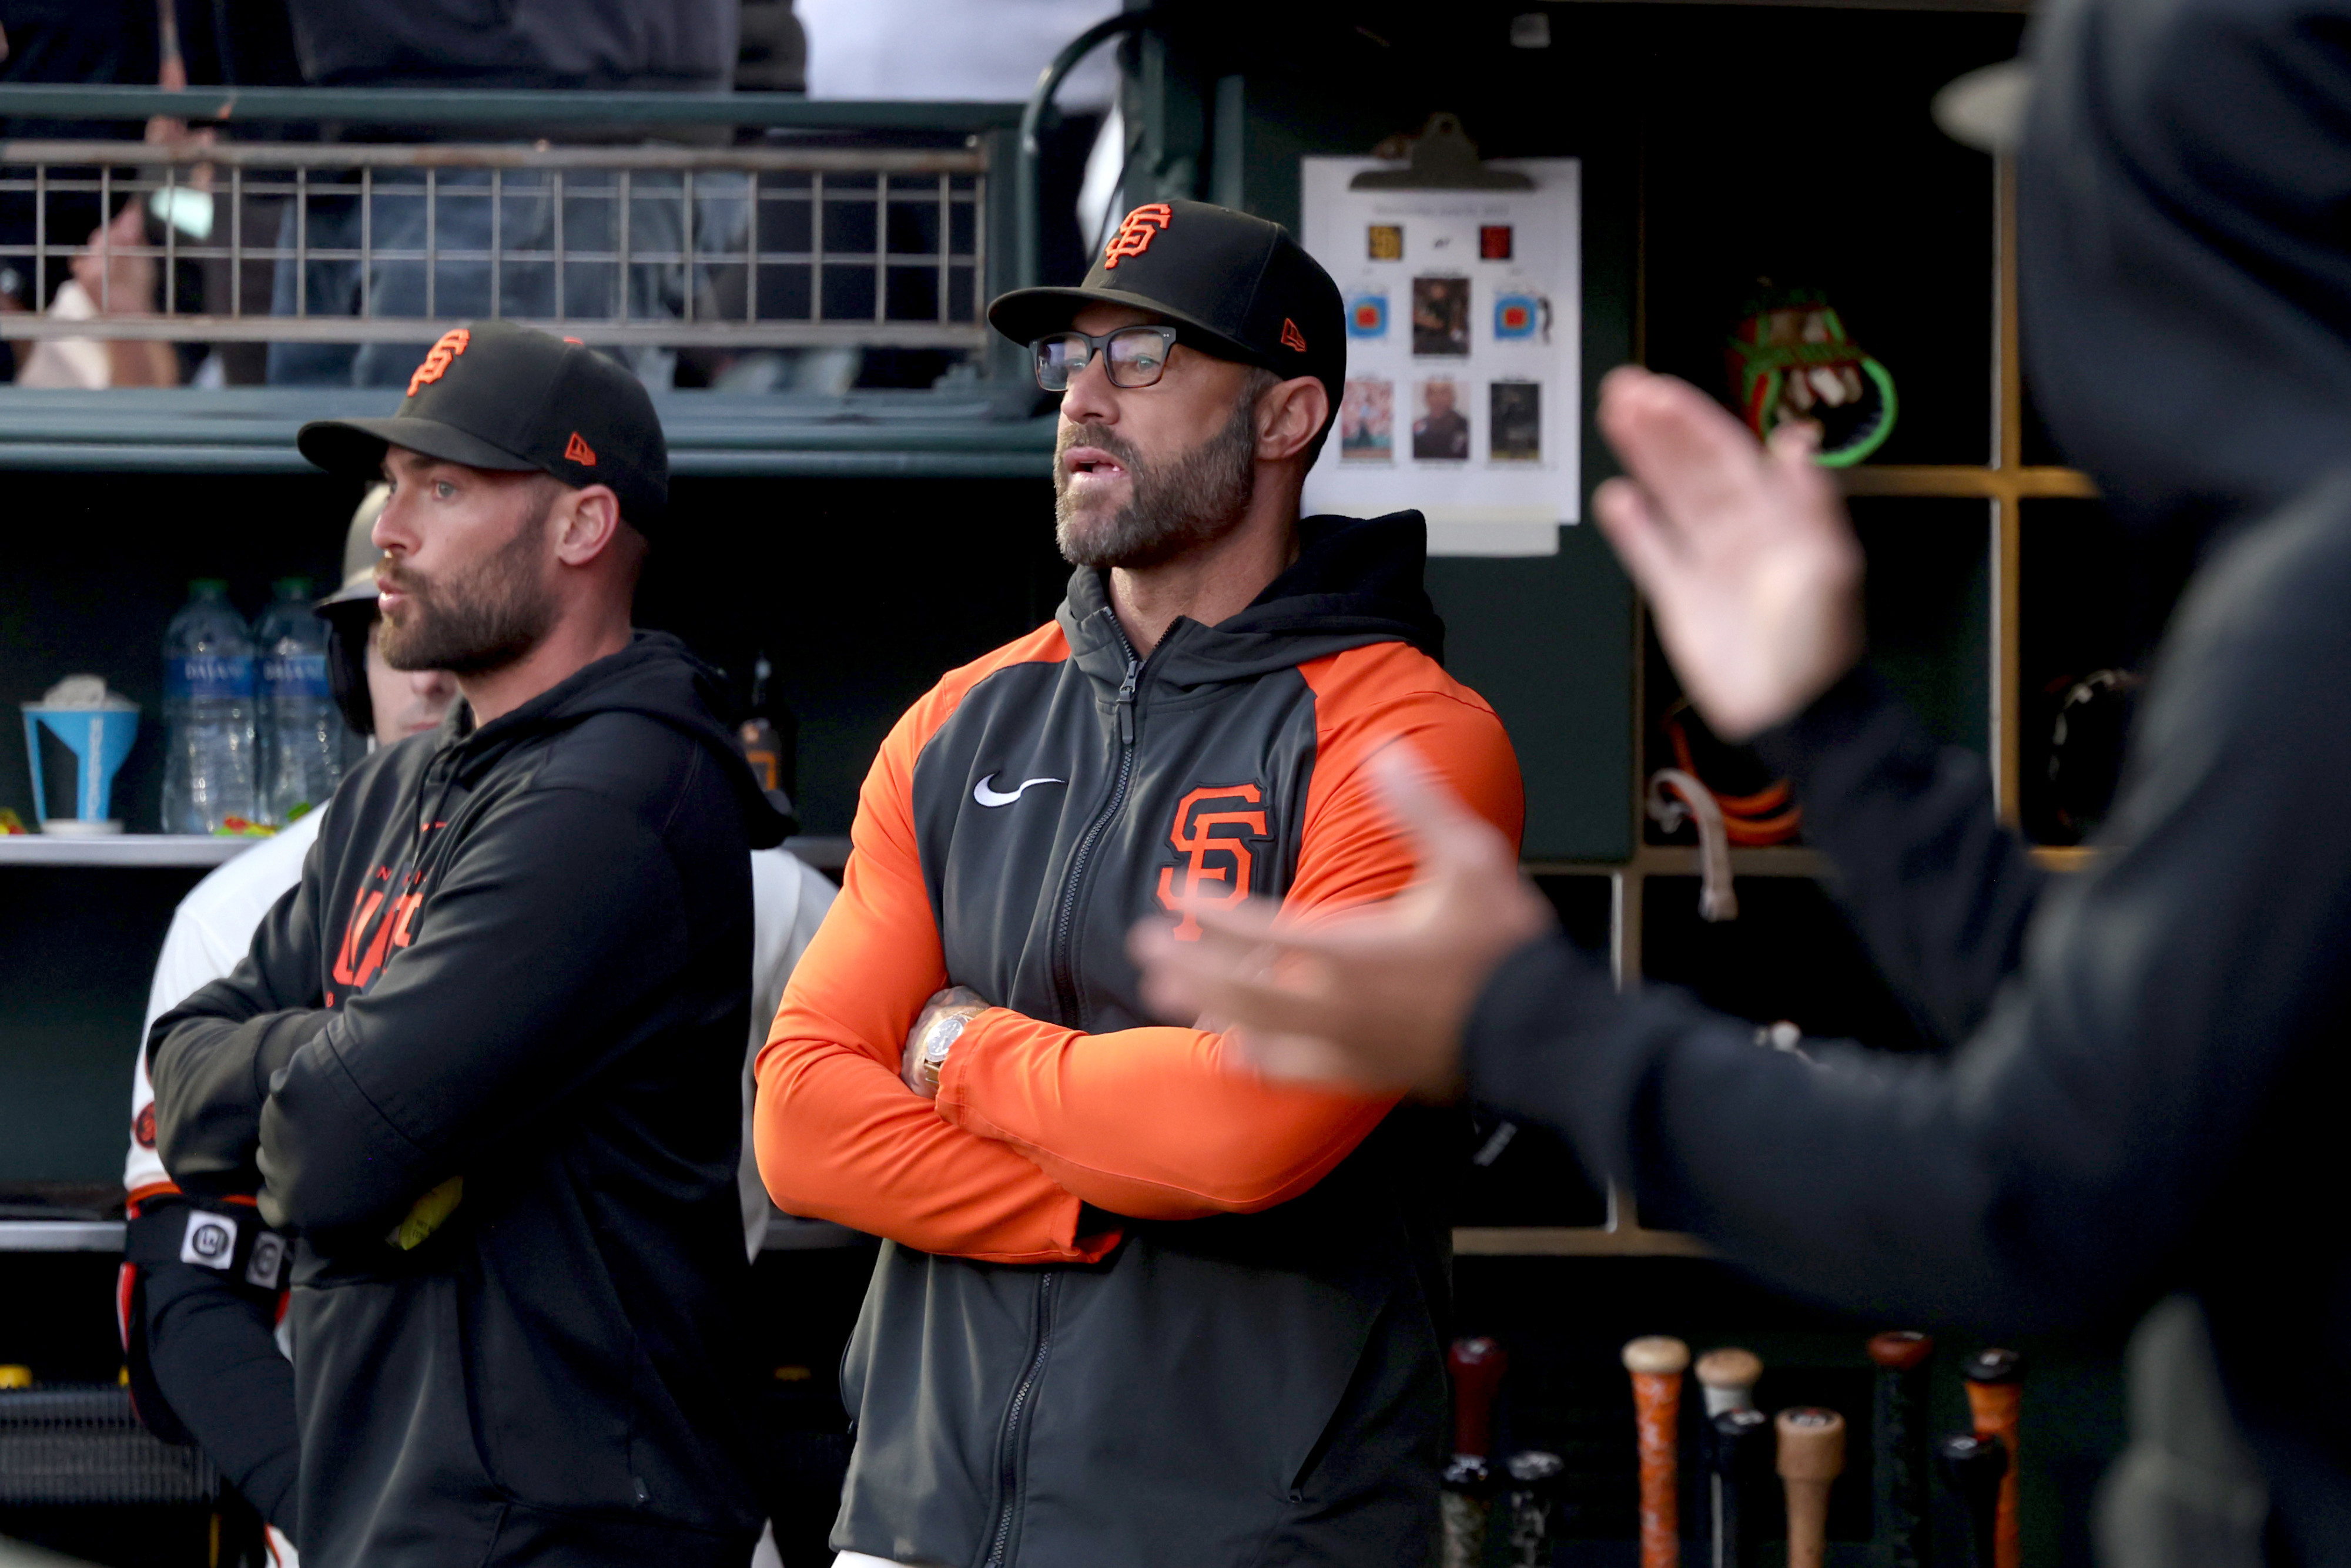 Giants coach Ron Wotus to reunite with Bruce Bochy